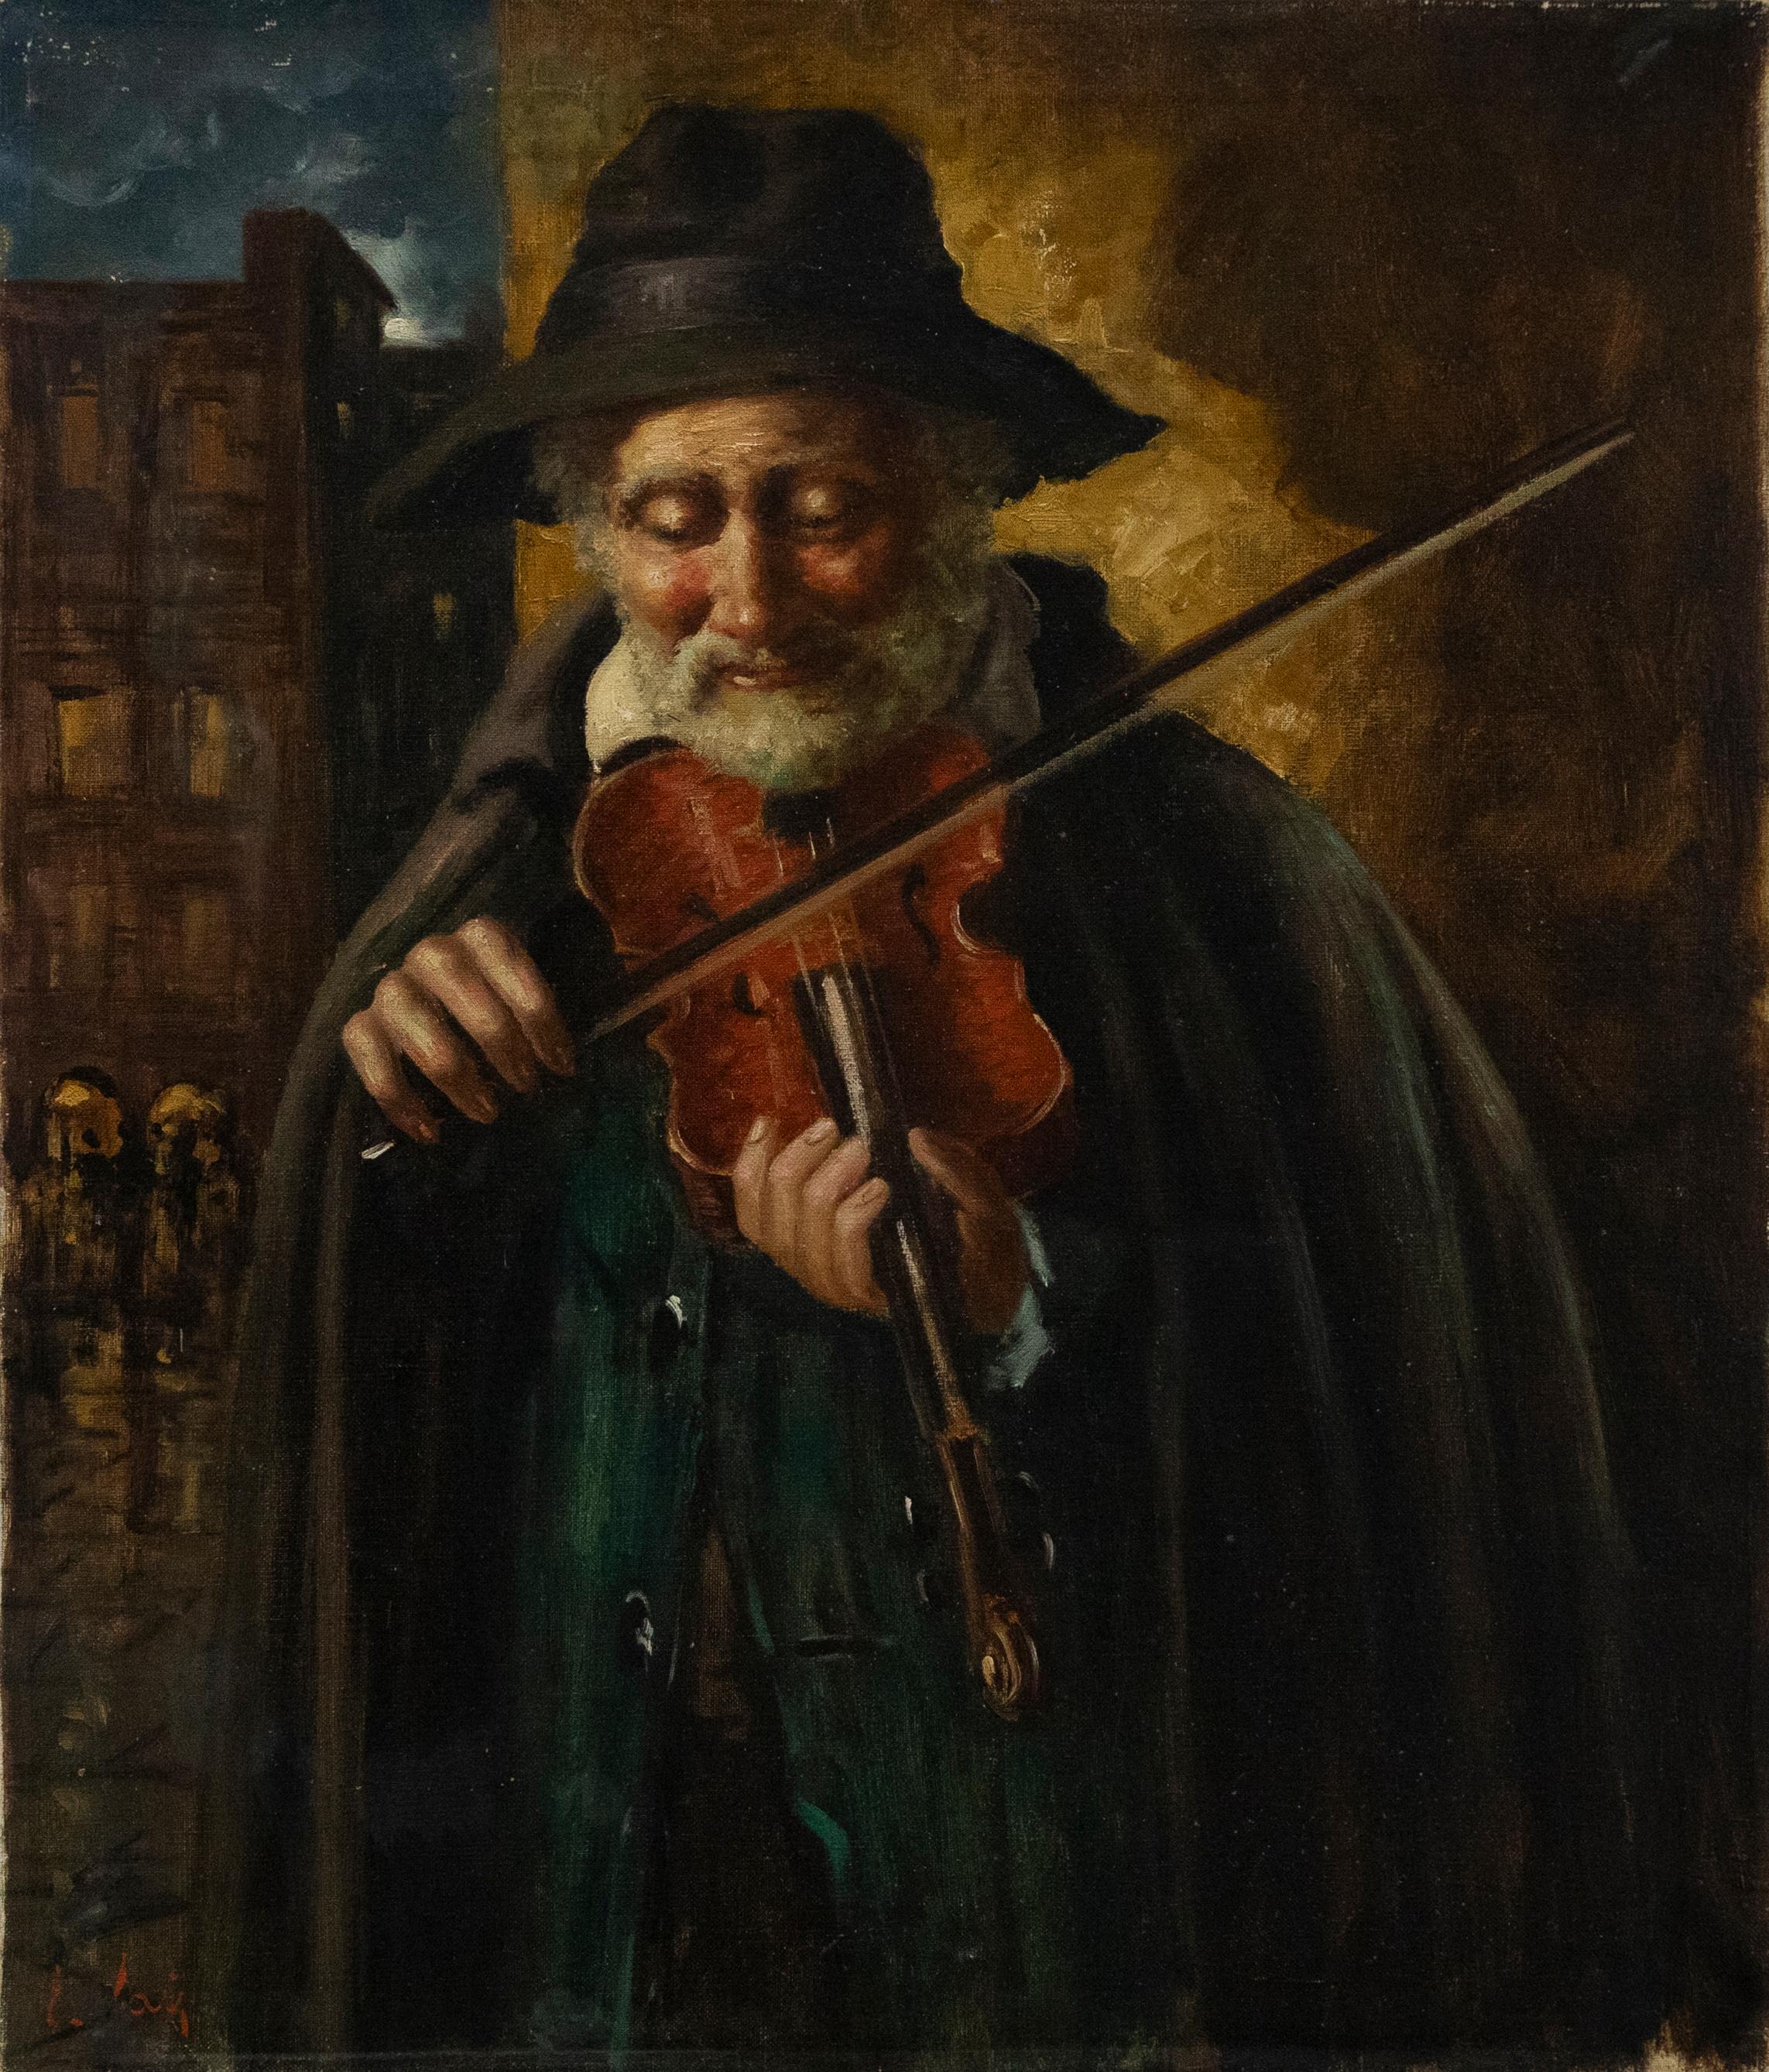 Unknown Portrait Painting - 20th Century Oil - The Violinist